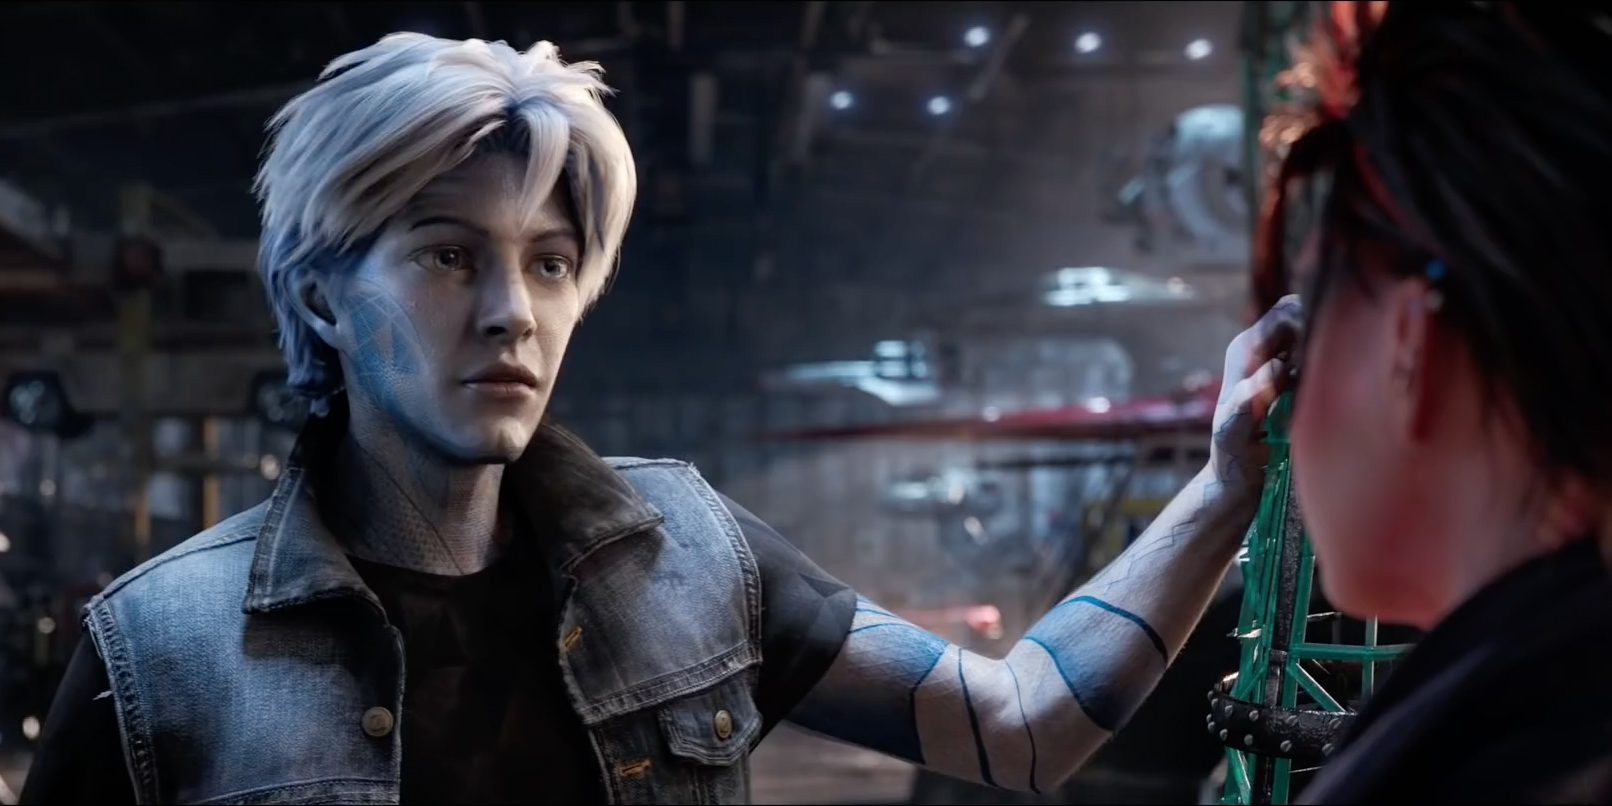 Three Shops Helped Create VFX for Spielberg's 'Ready Player One